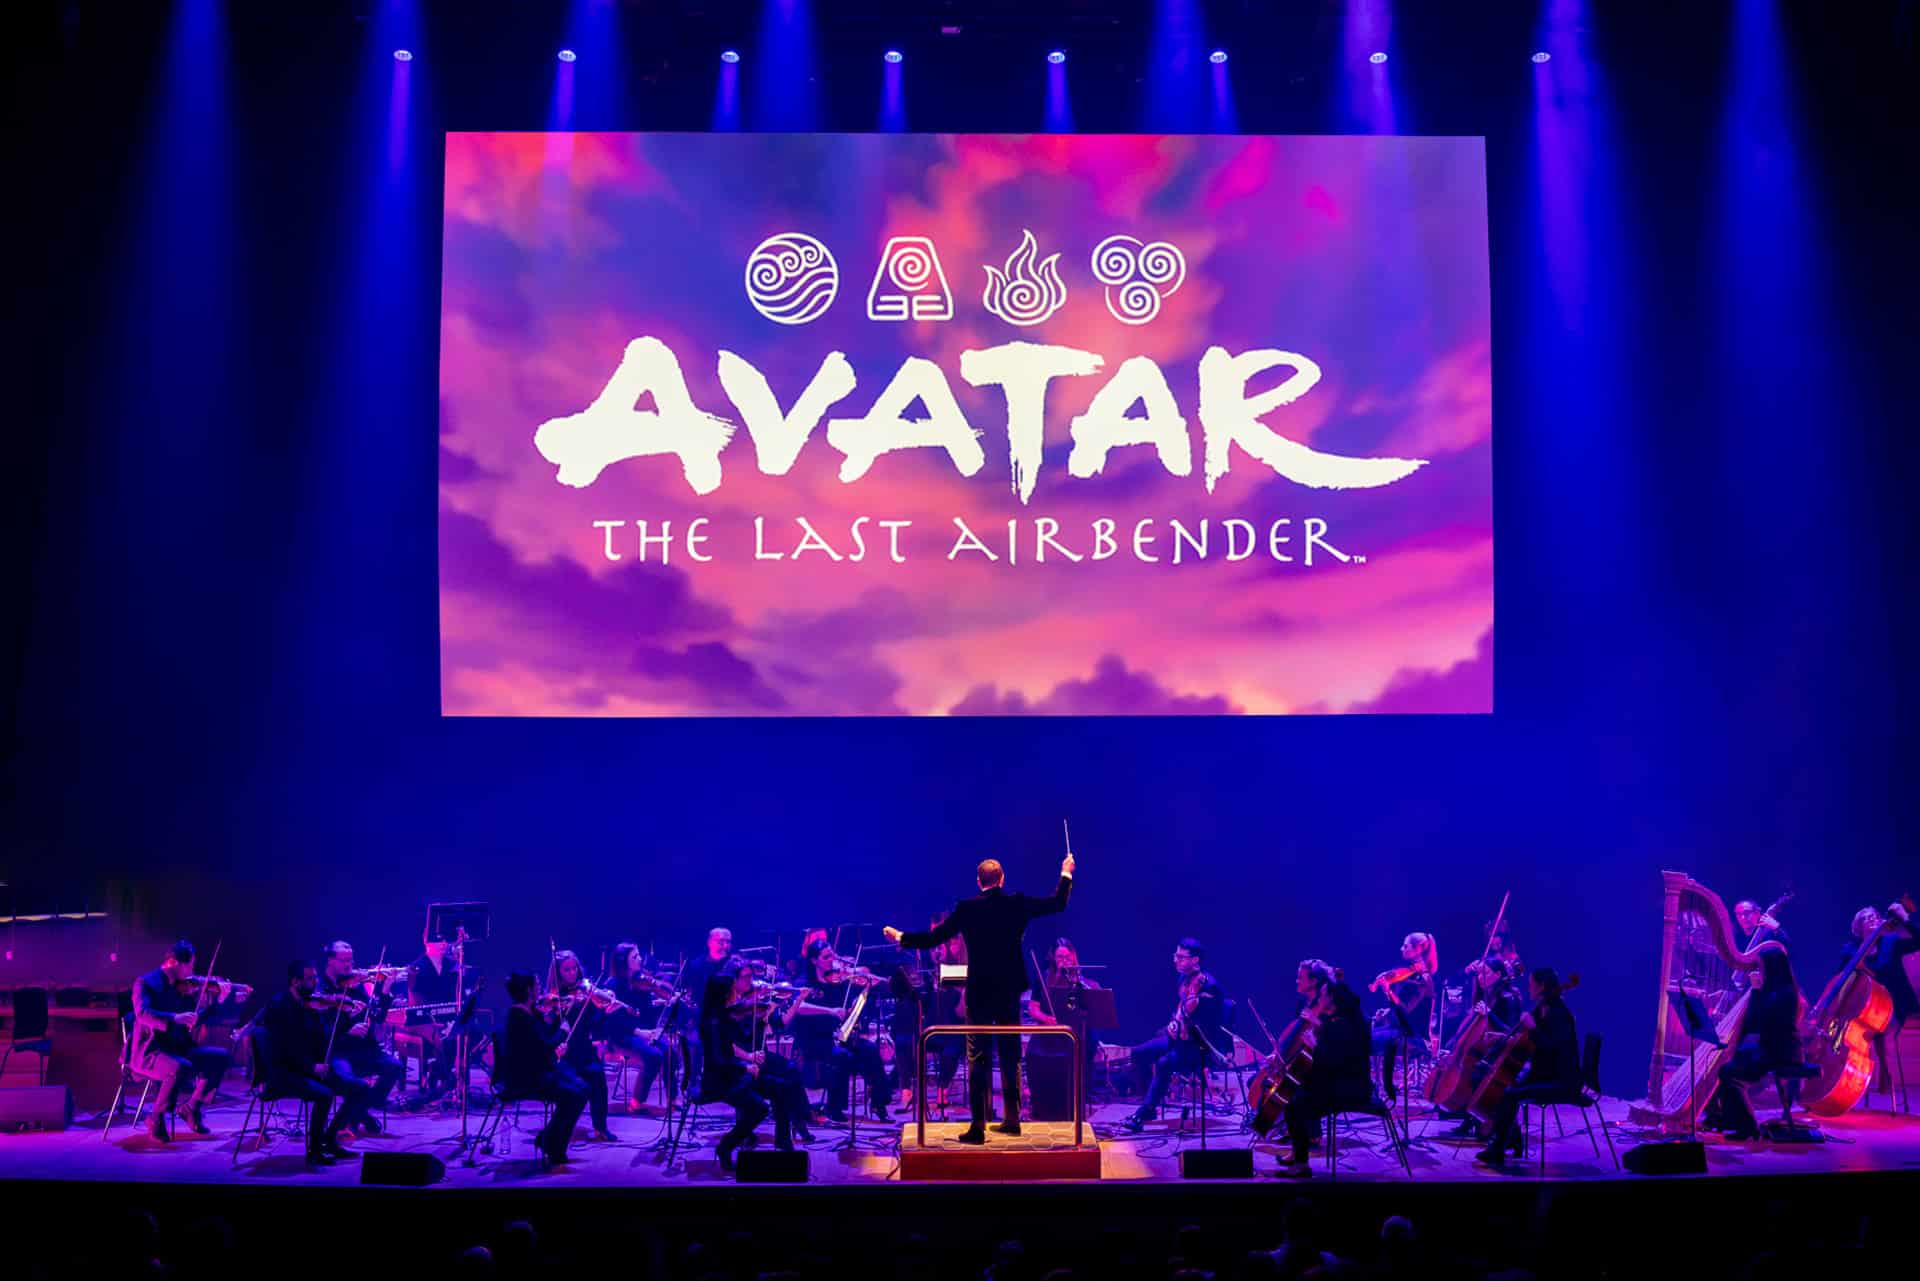 Avatar Concert on stage with orchestra playing AVATAR on screen